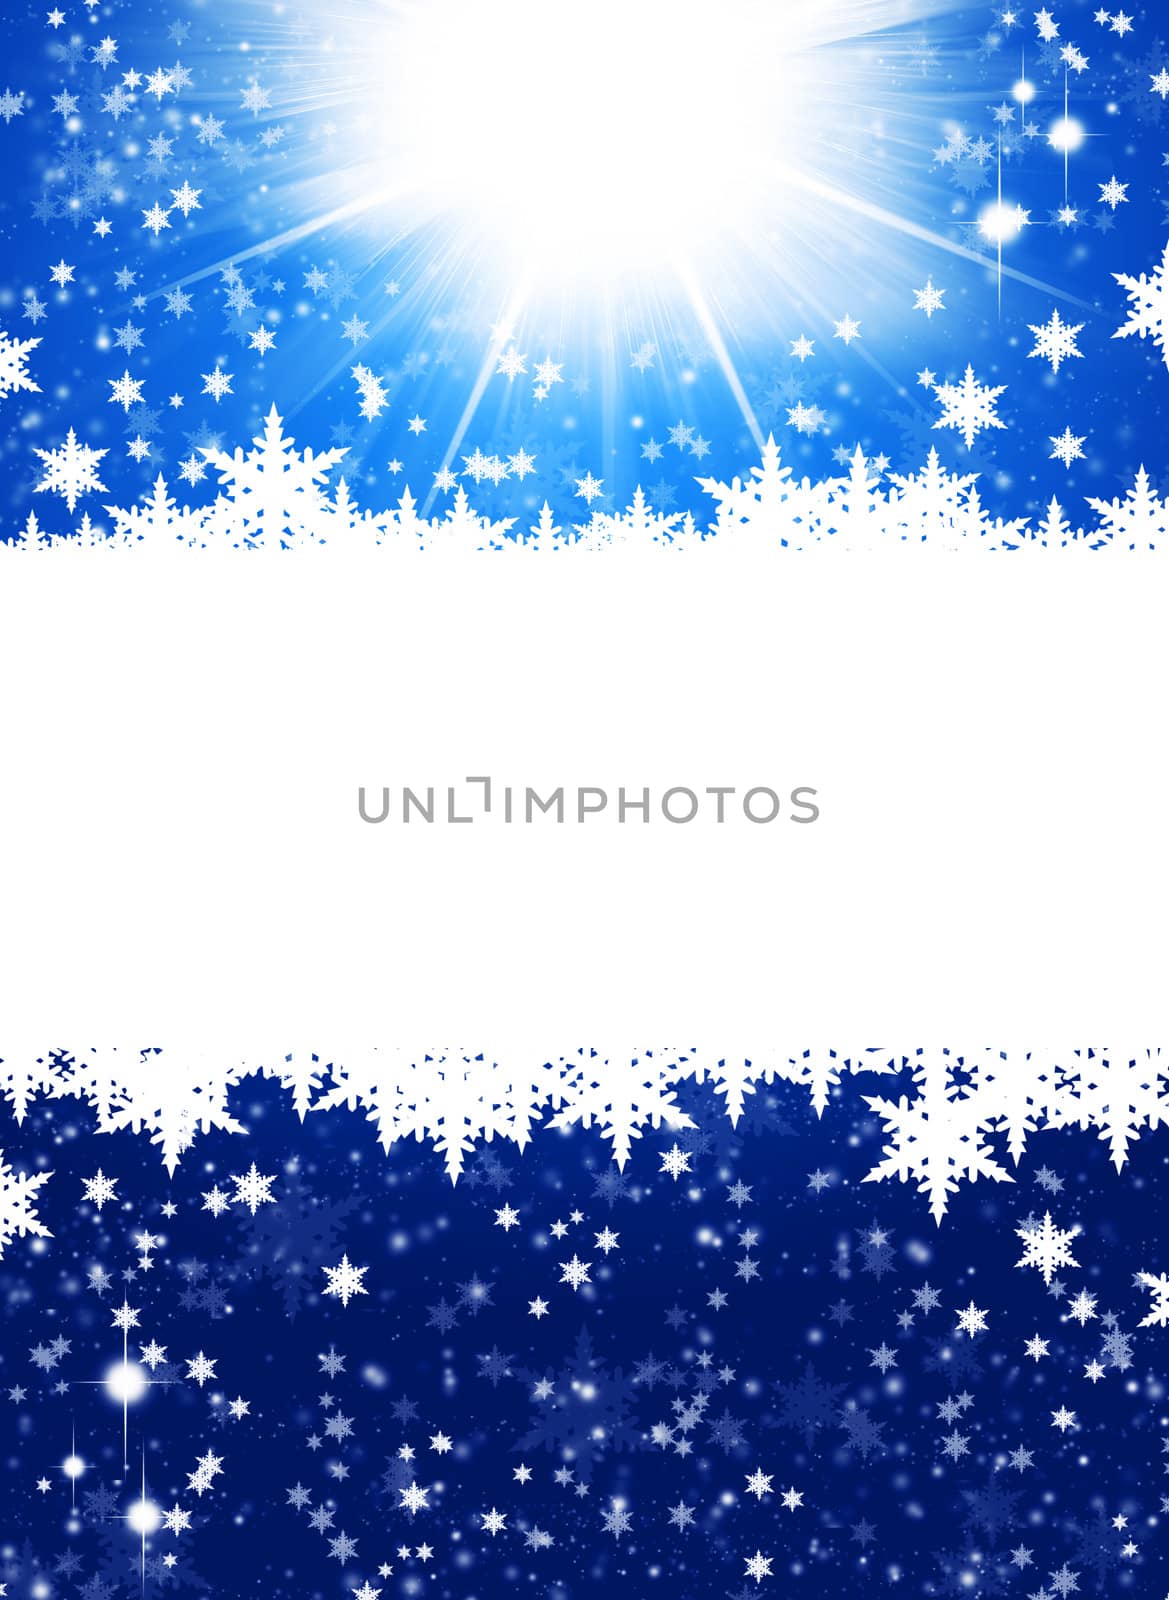 Snowflakes on abstract blue background by cherezoff